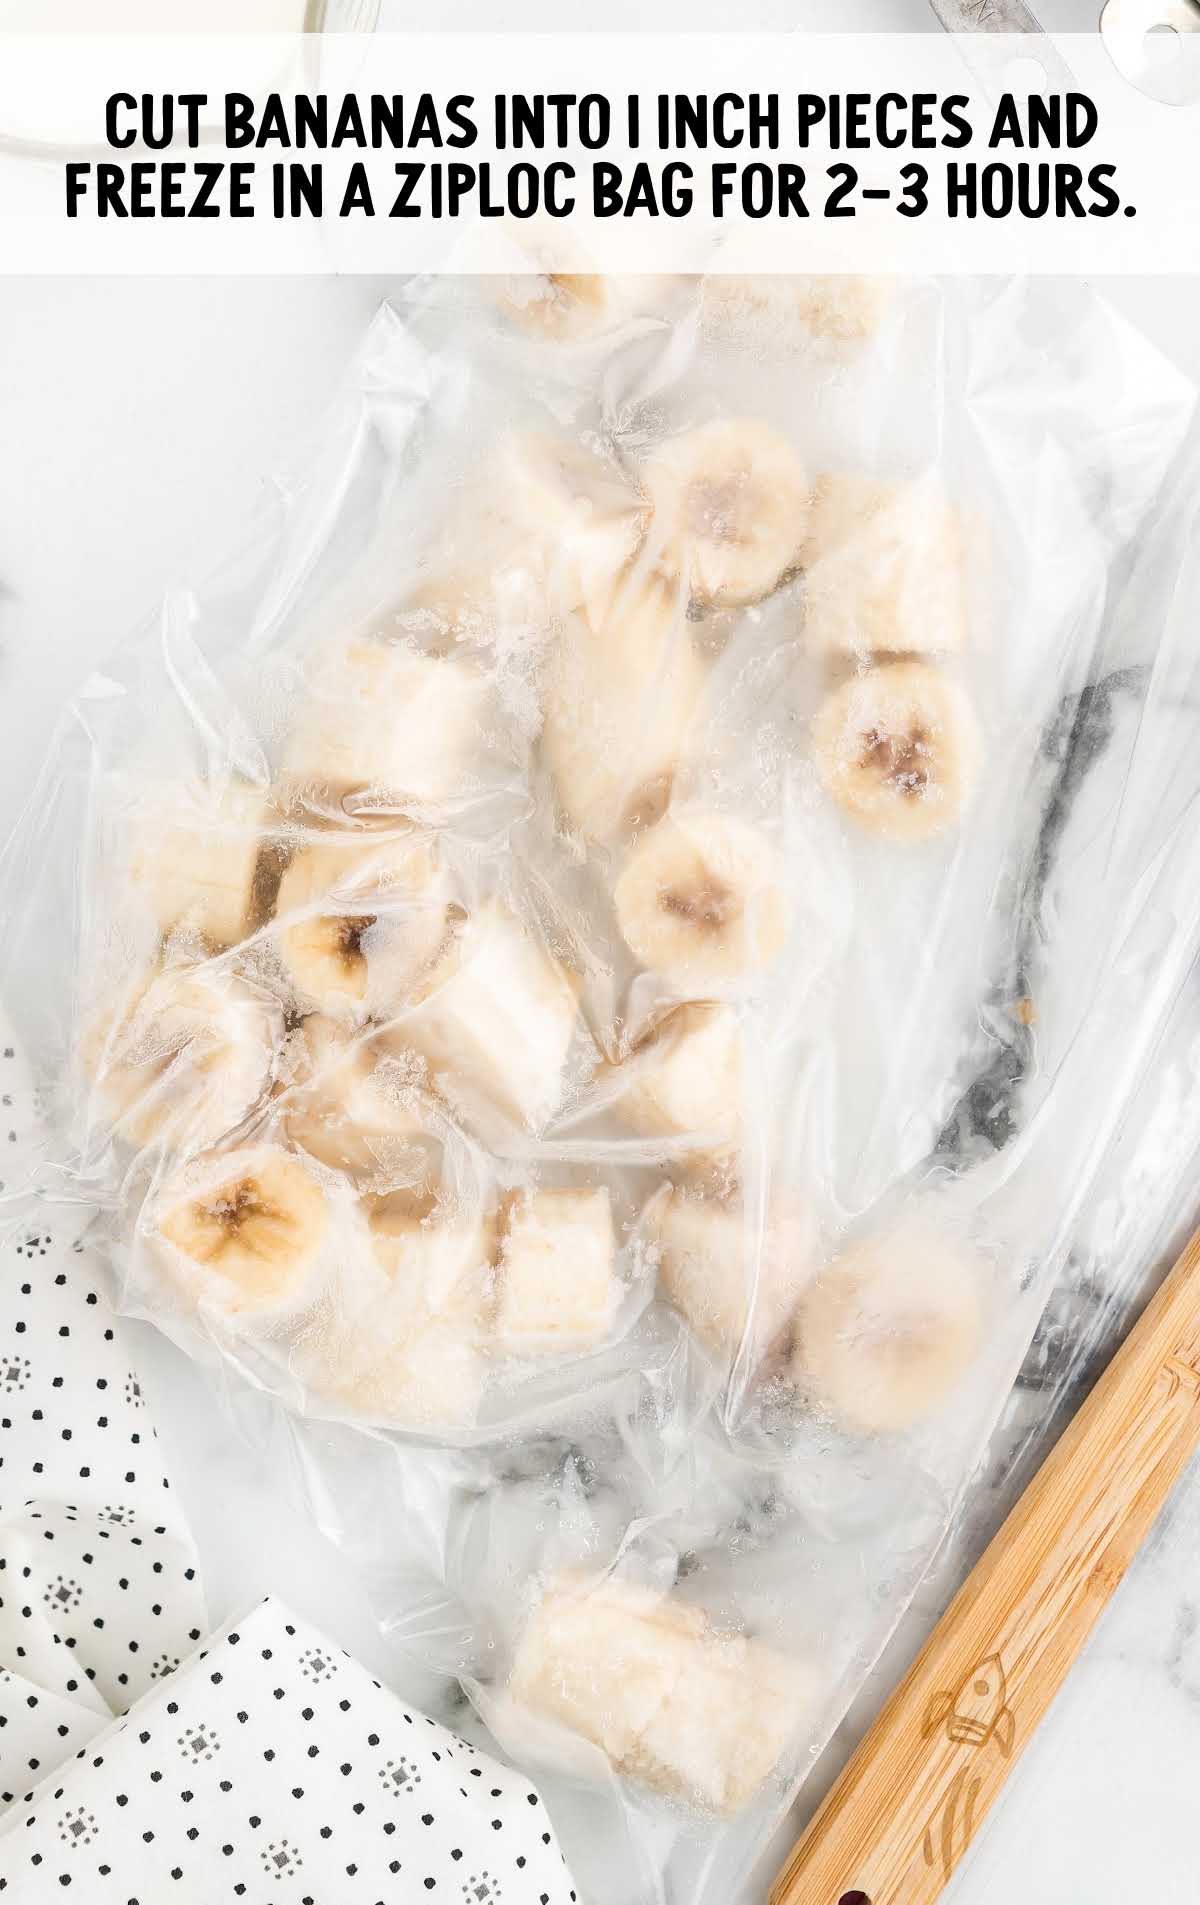 dog ice cream process shot of bananas cut into pieces and placed in a ziploc bag